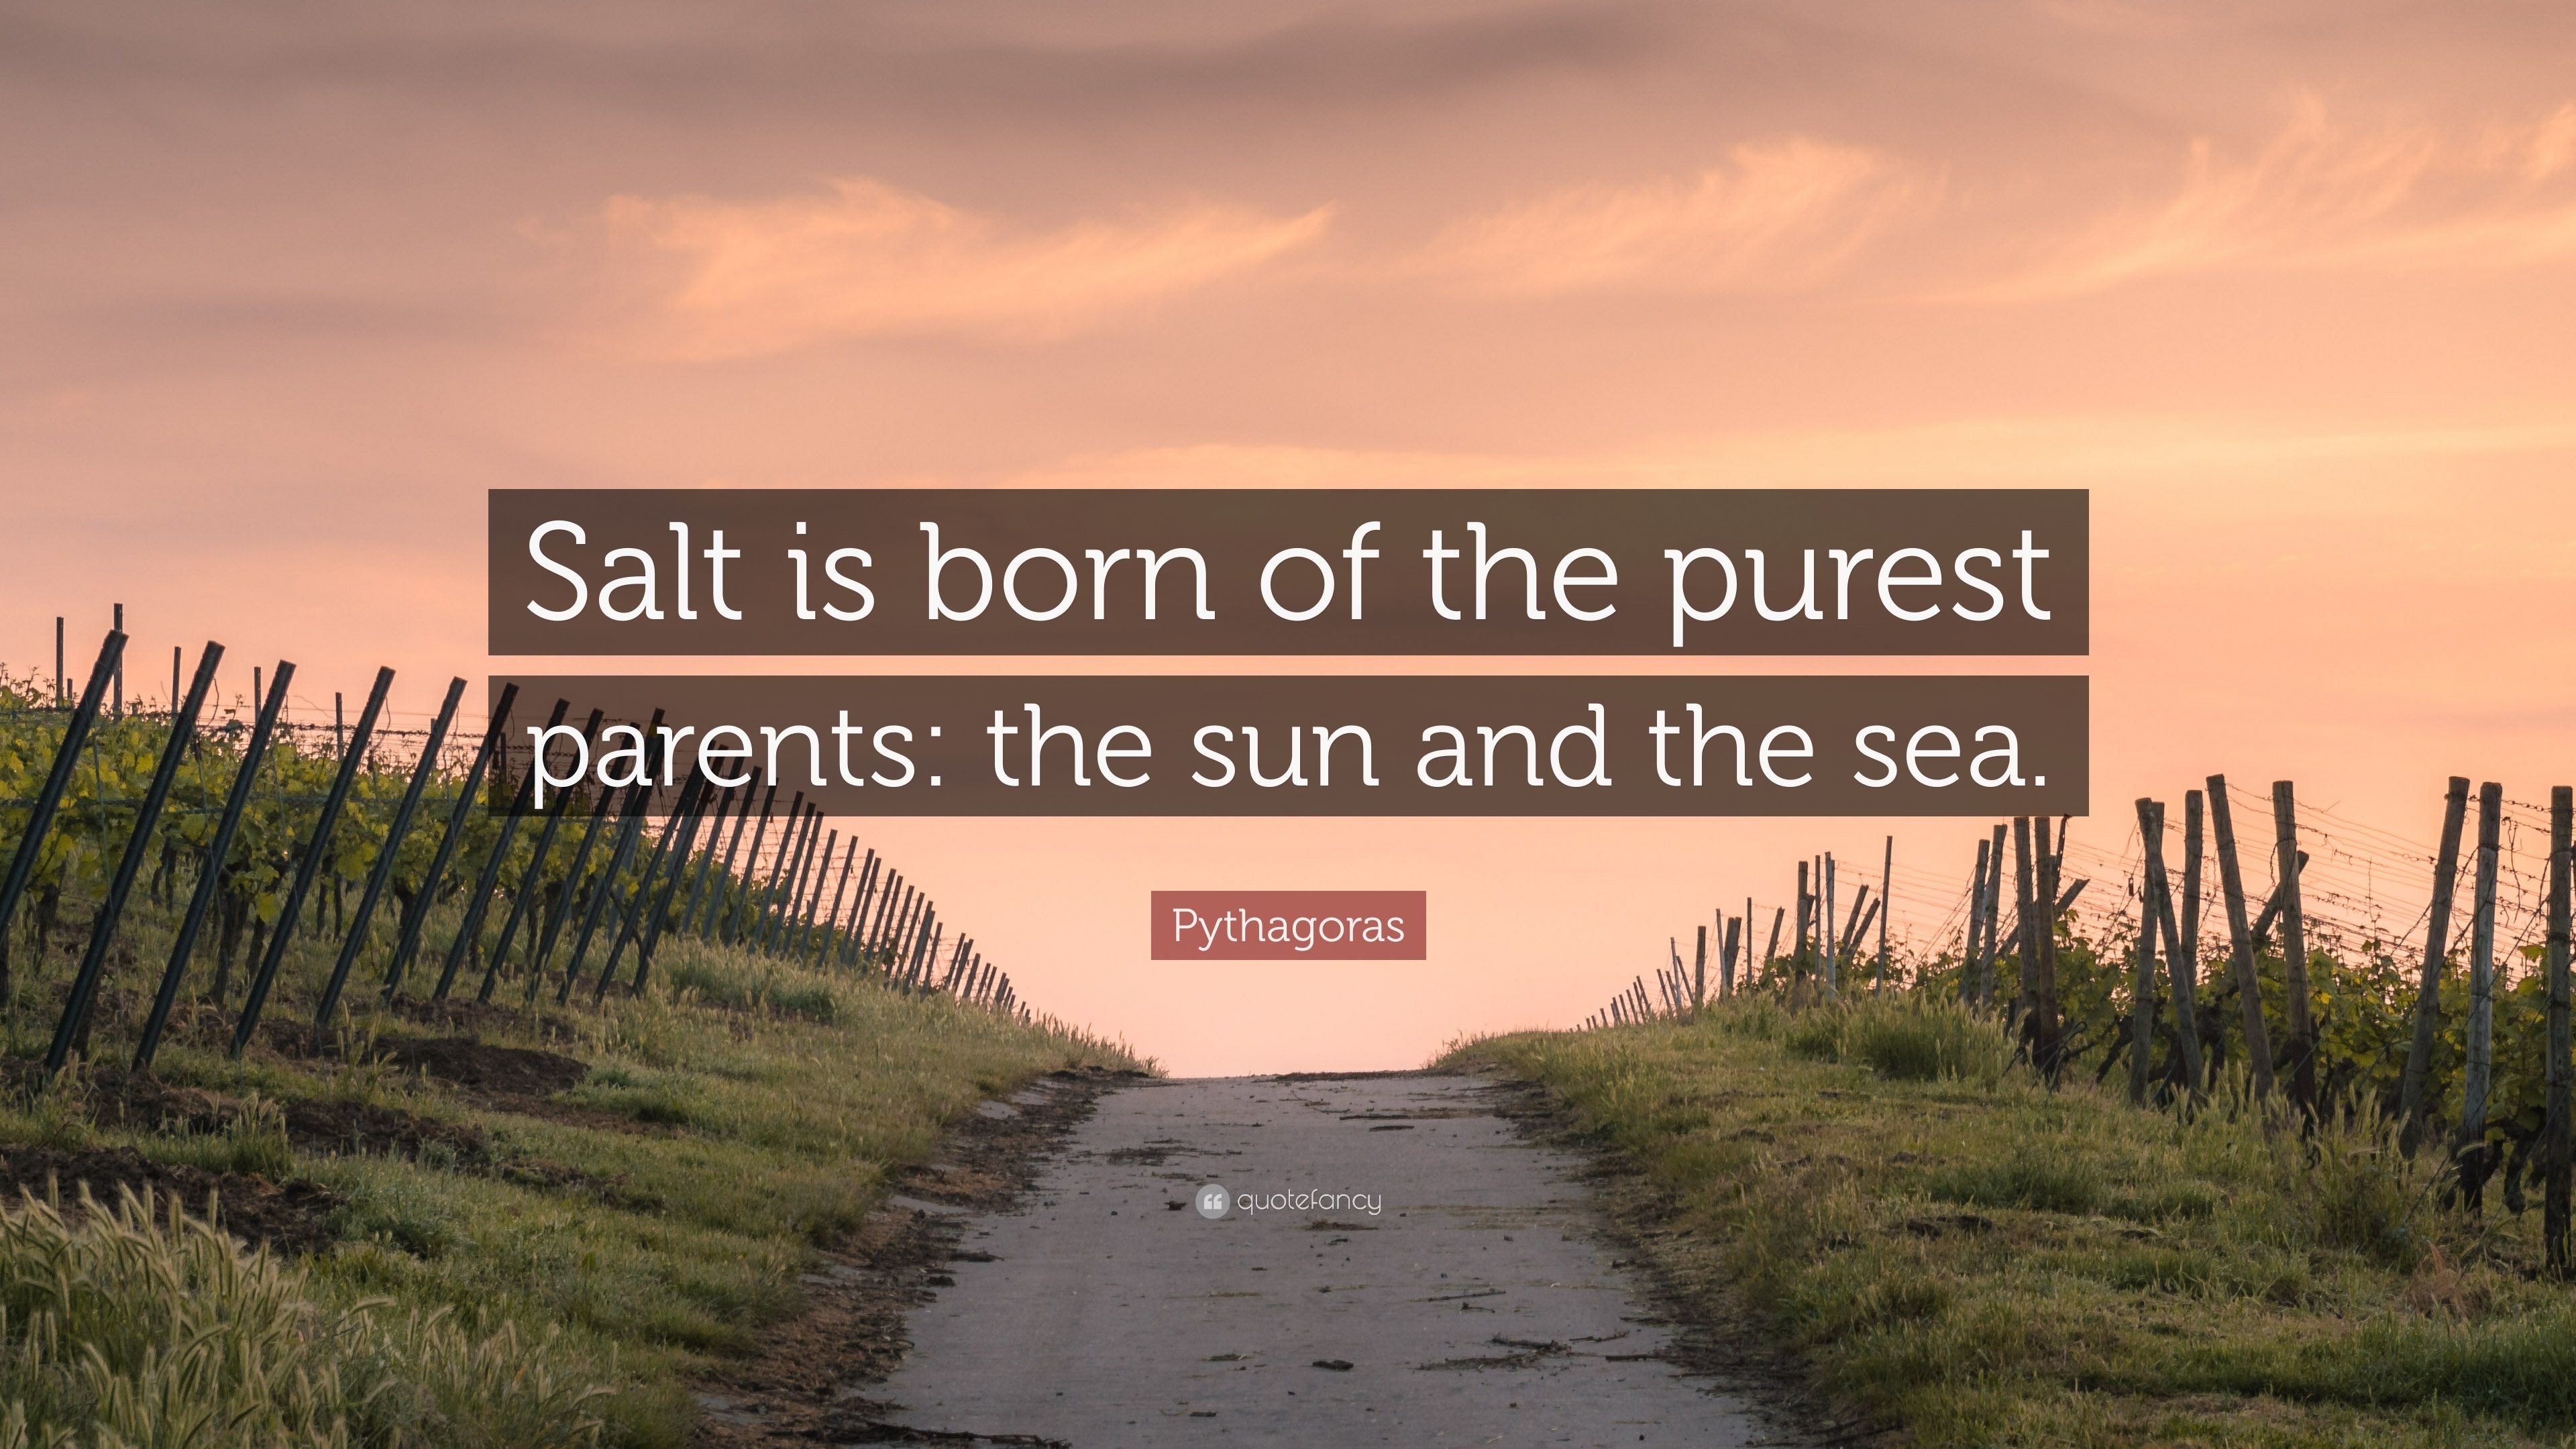 Pythagoras Quote: “Salt is born of the purest parents: the sun and the